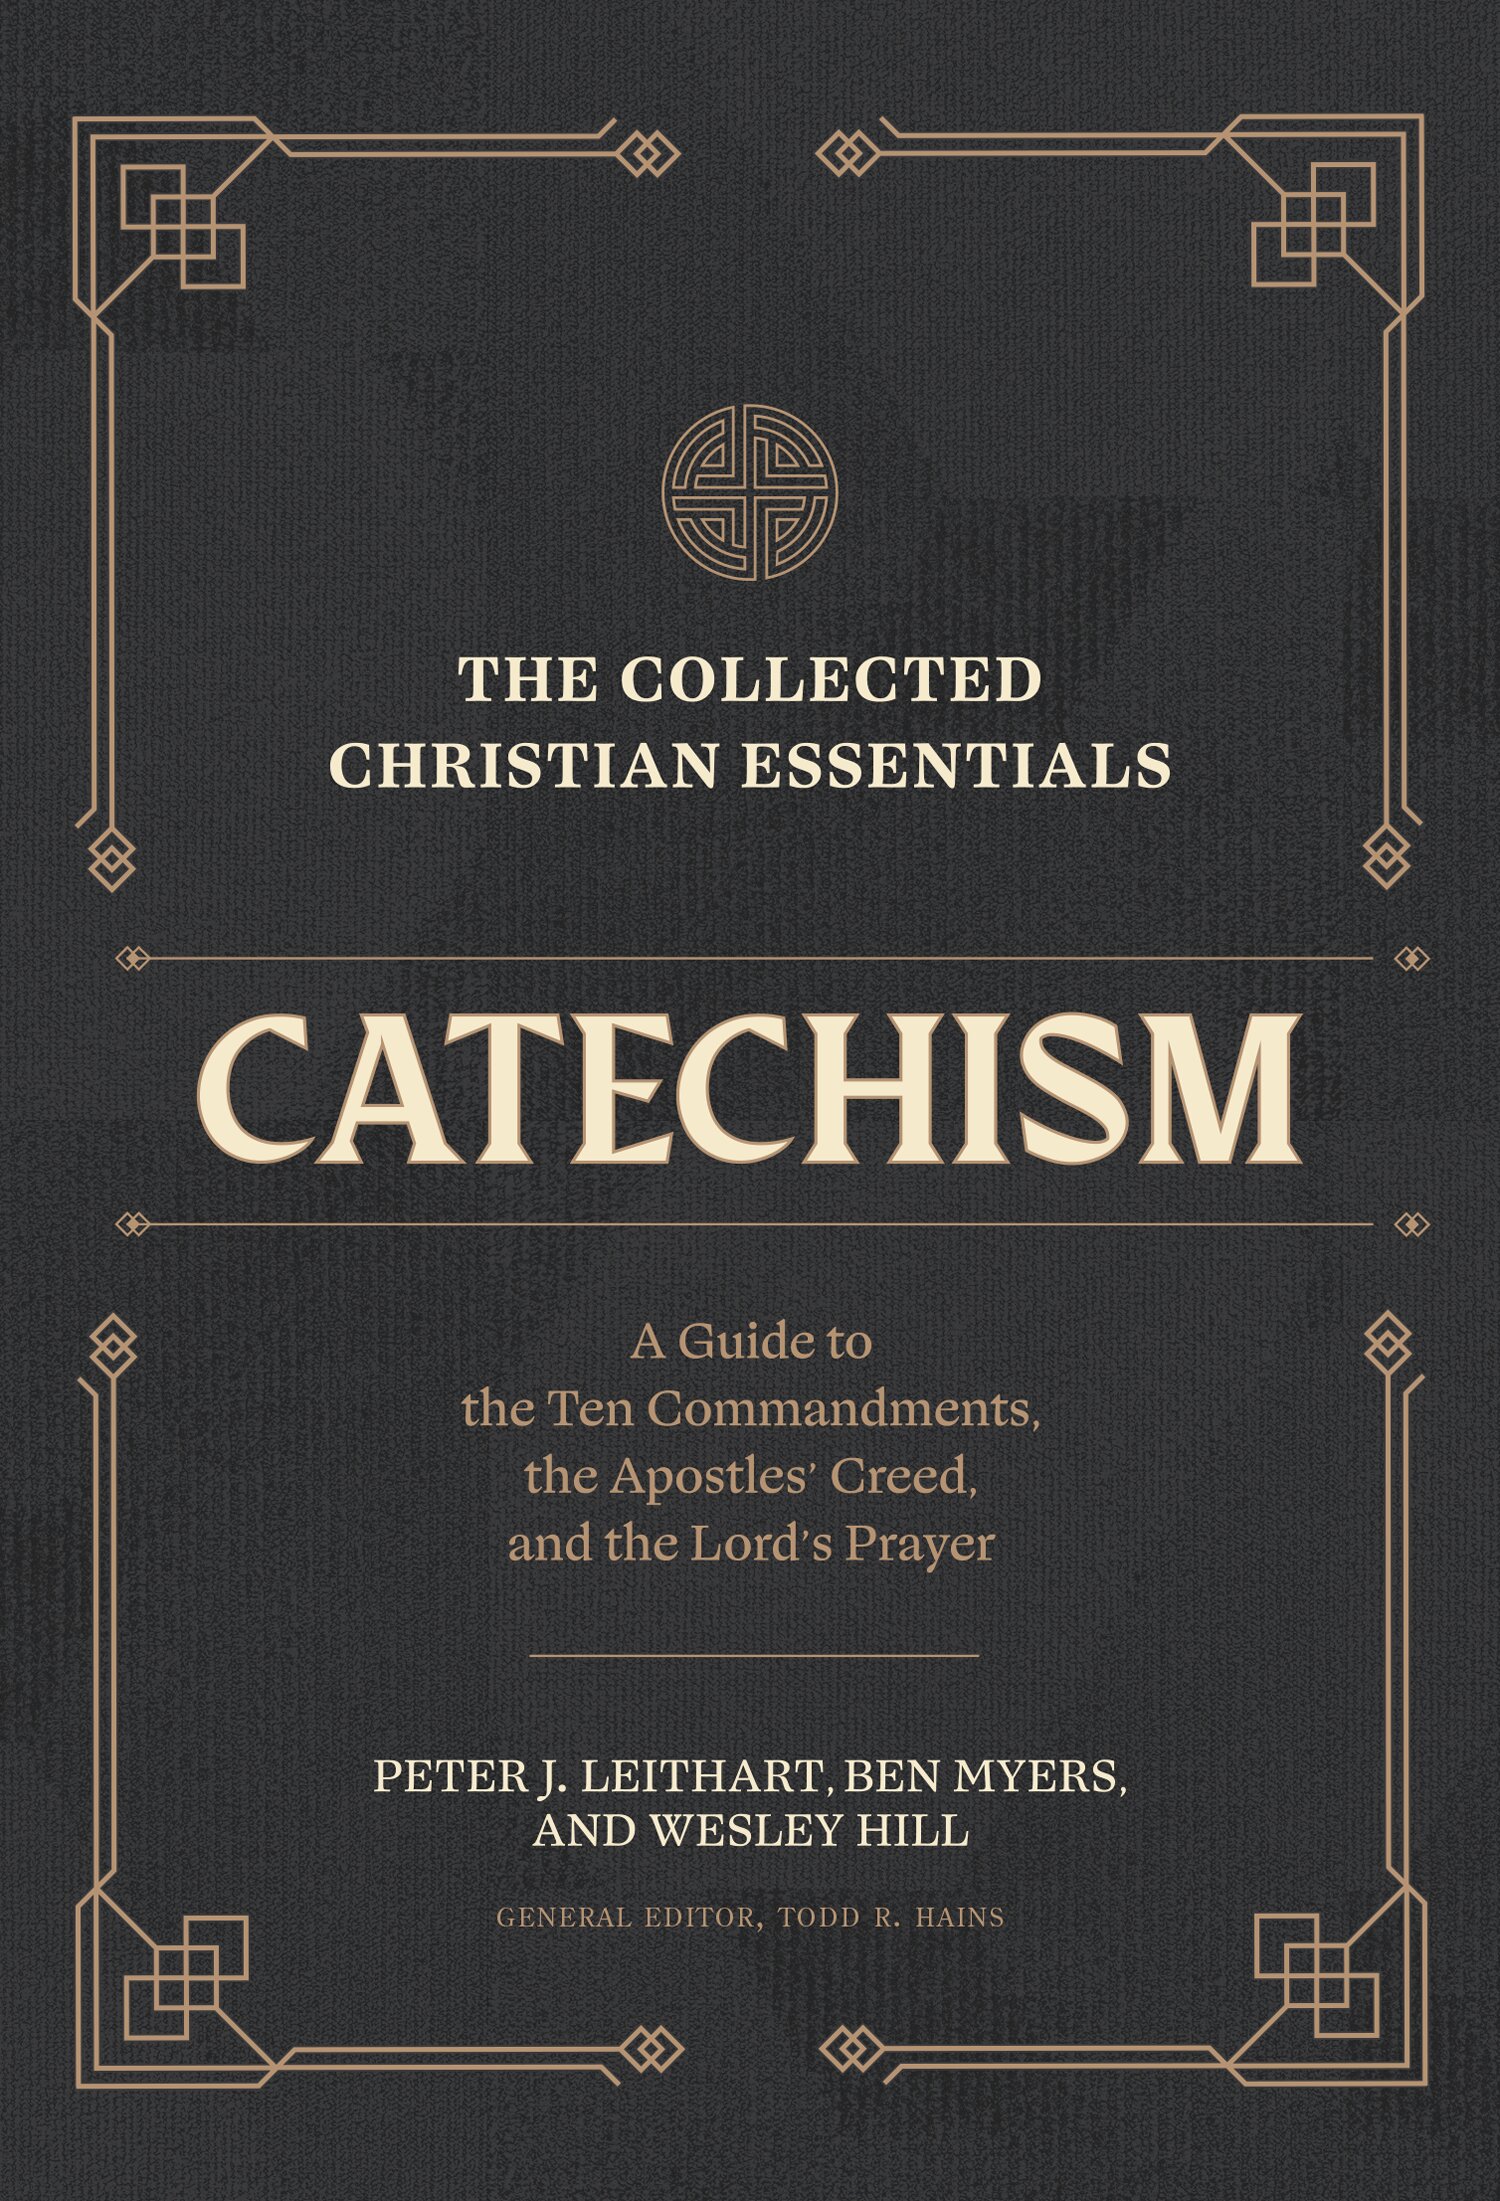 The Collected Christian Essentials: Catechism: A Guide to the Ten Commandments, the Apostles’ Creed, and the Lord’s Prayer